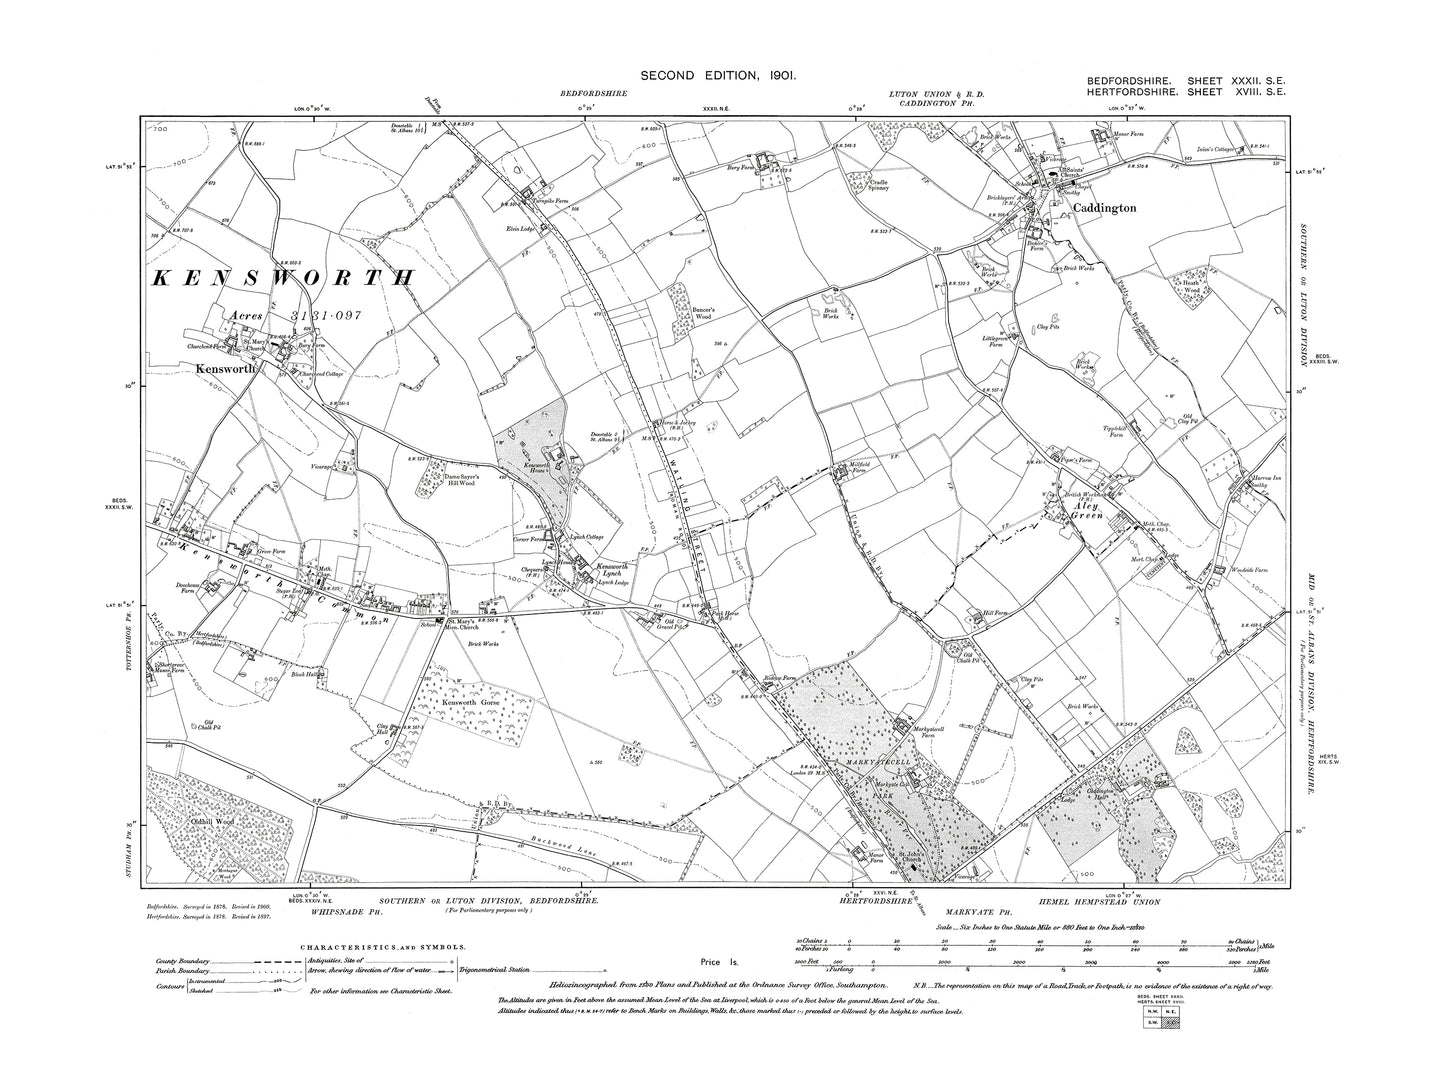 A 1901 map showing Caddington and Kenworth in Bedfordshire - A Digital Download 0f OS 1:10560 scale map, Beds 32SE